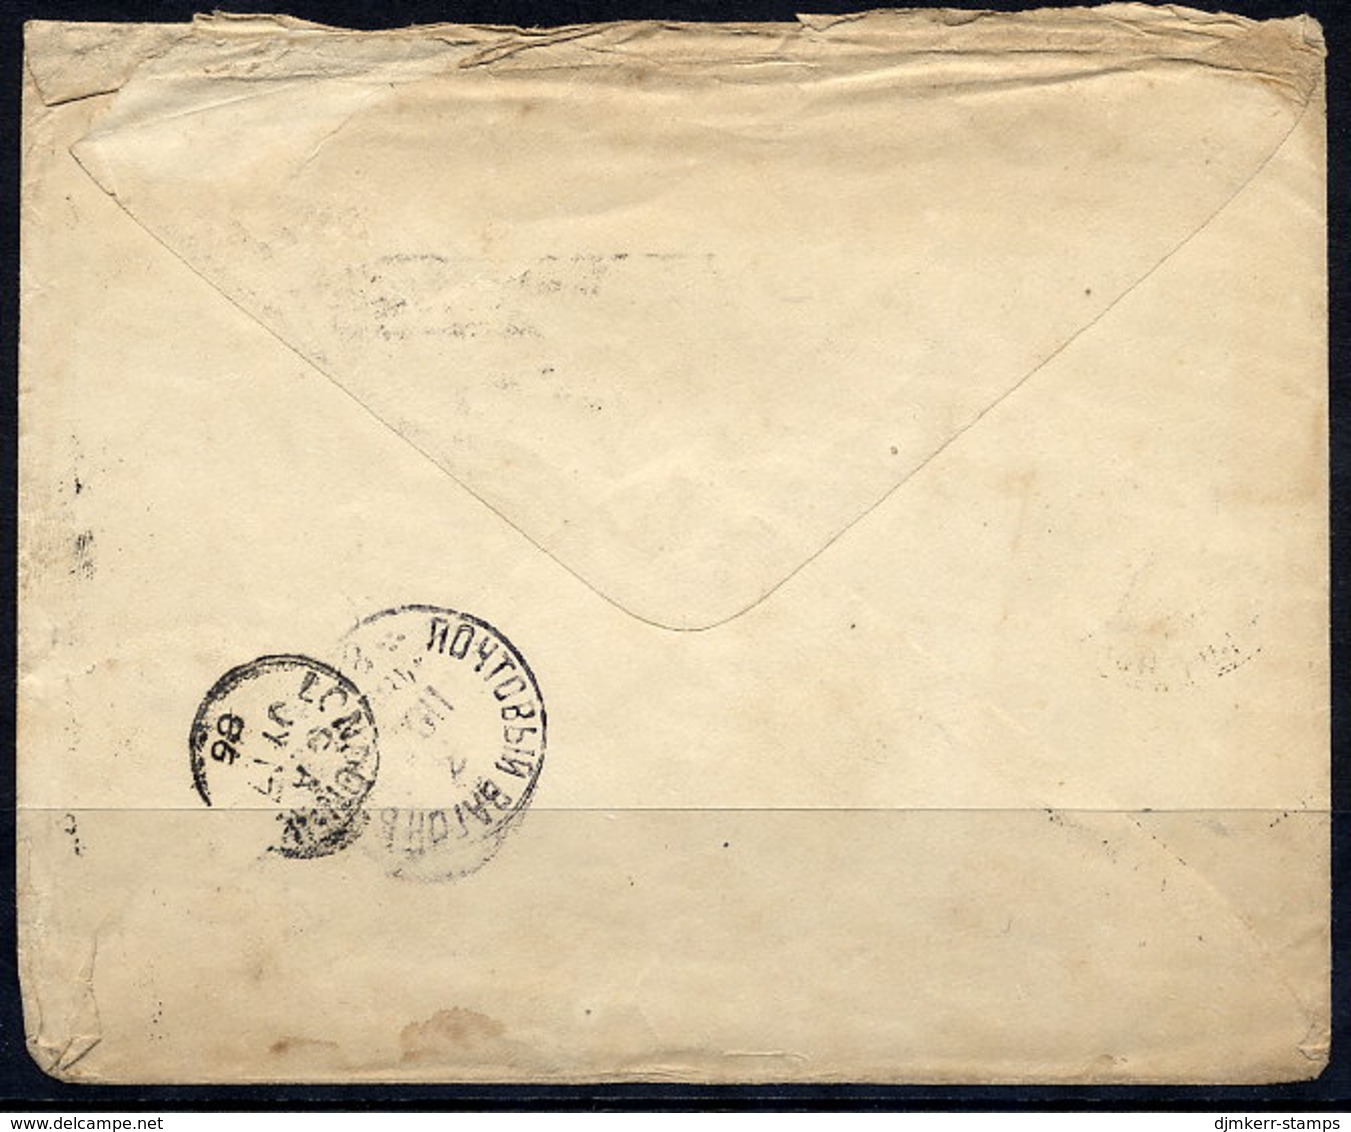 RUSSIA 1886 7 K. Stationery Envelope Used To England From Ekaterinoslav - Ganzsachen